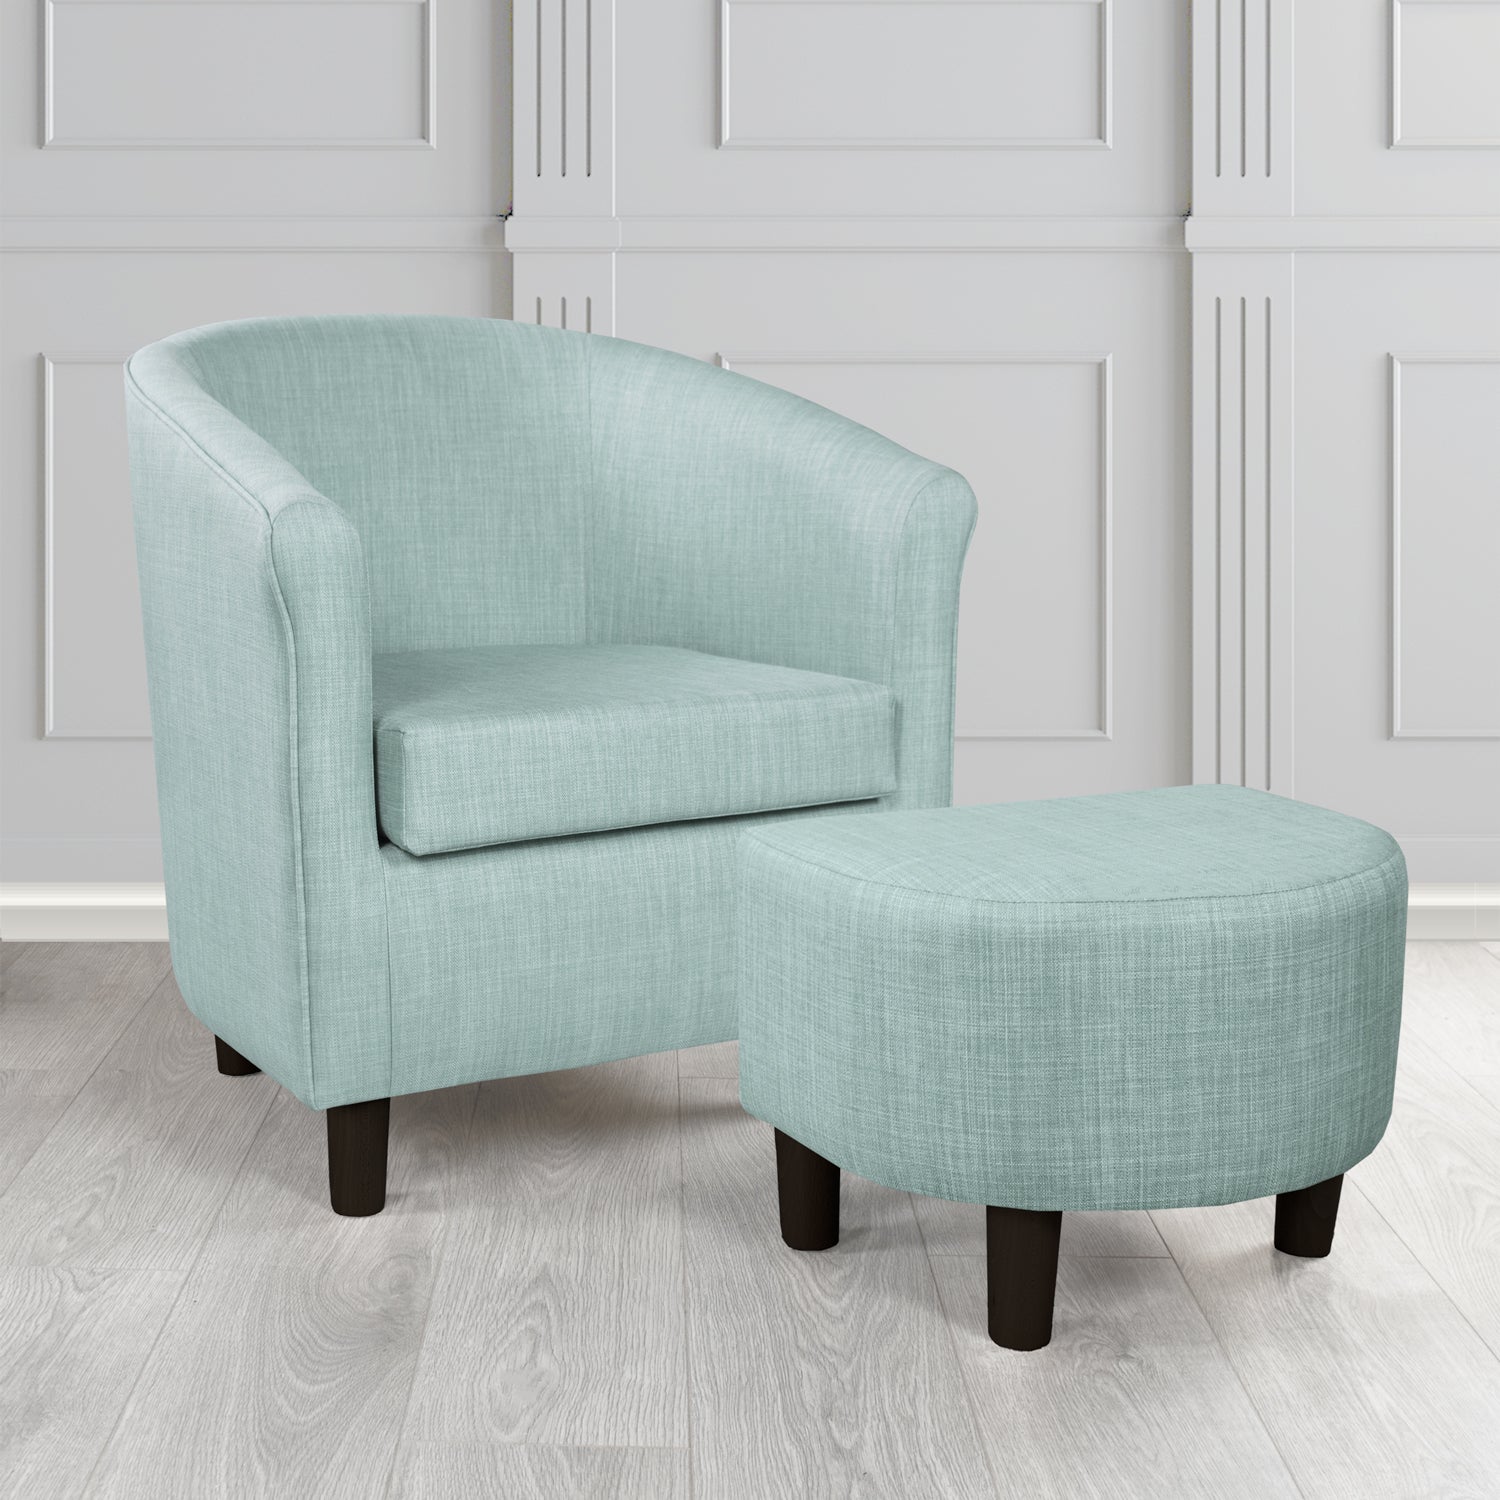 Tuscany Charles Sky Linen Plain Fabric Tub Chair with Dee Footstool Set - The Tub Chair Shop